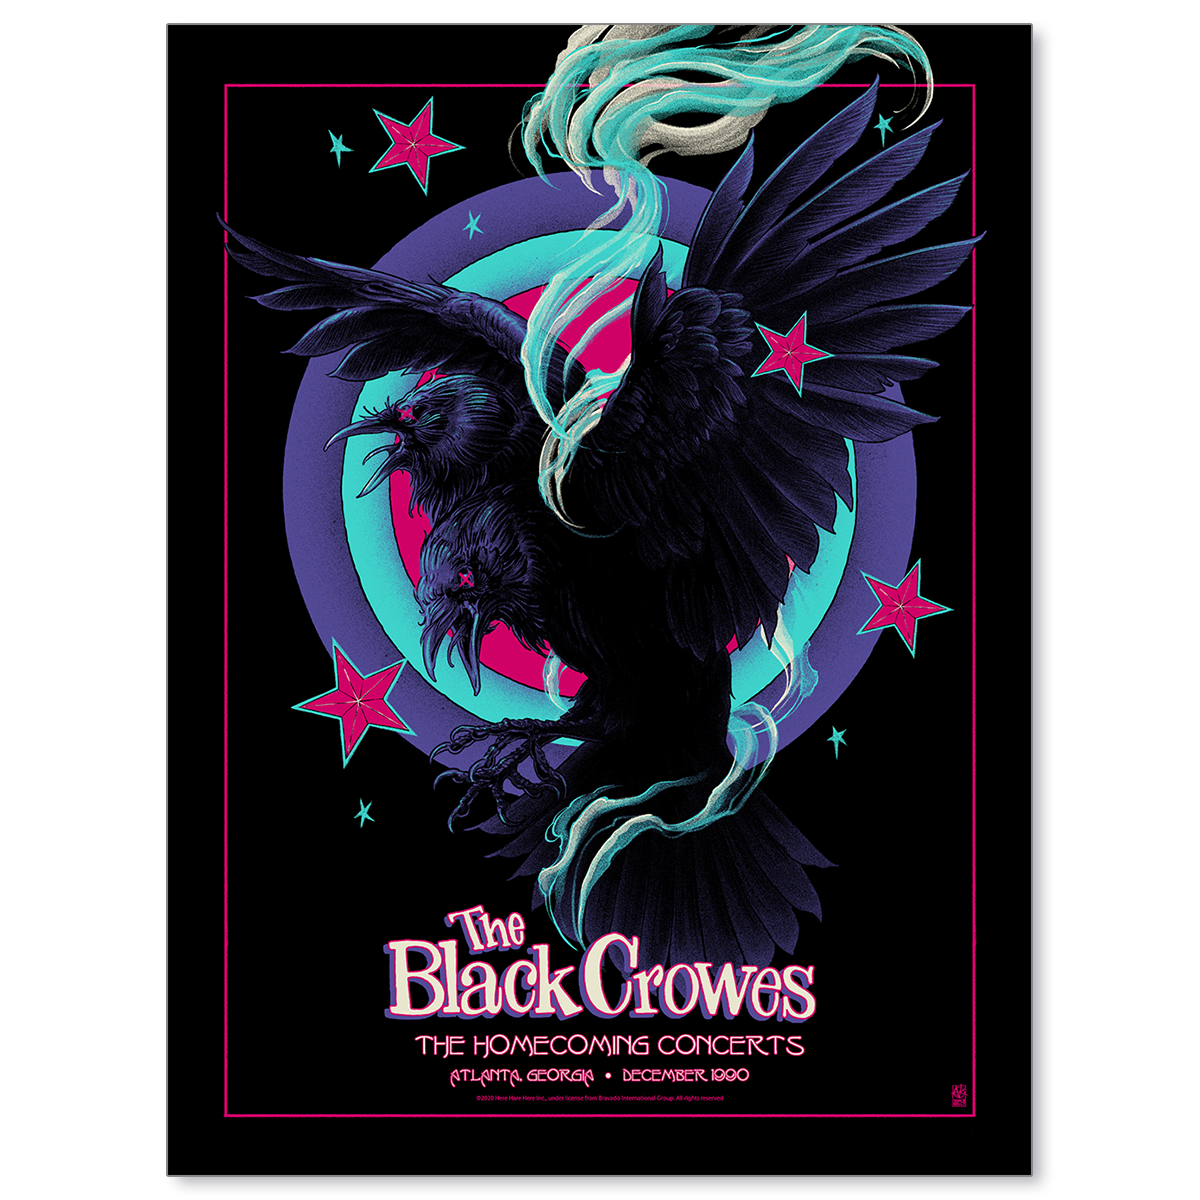 The Black Crowes Homecoming Concerts (Variant Edition)